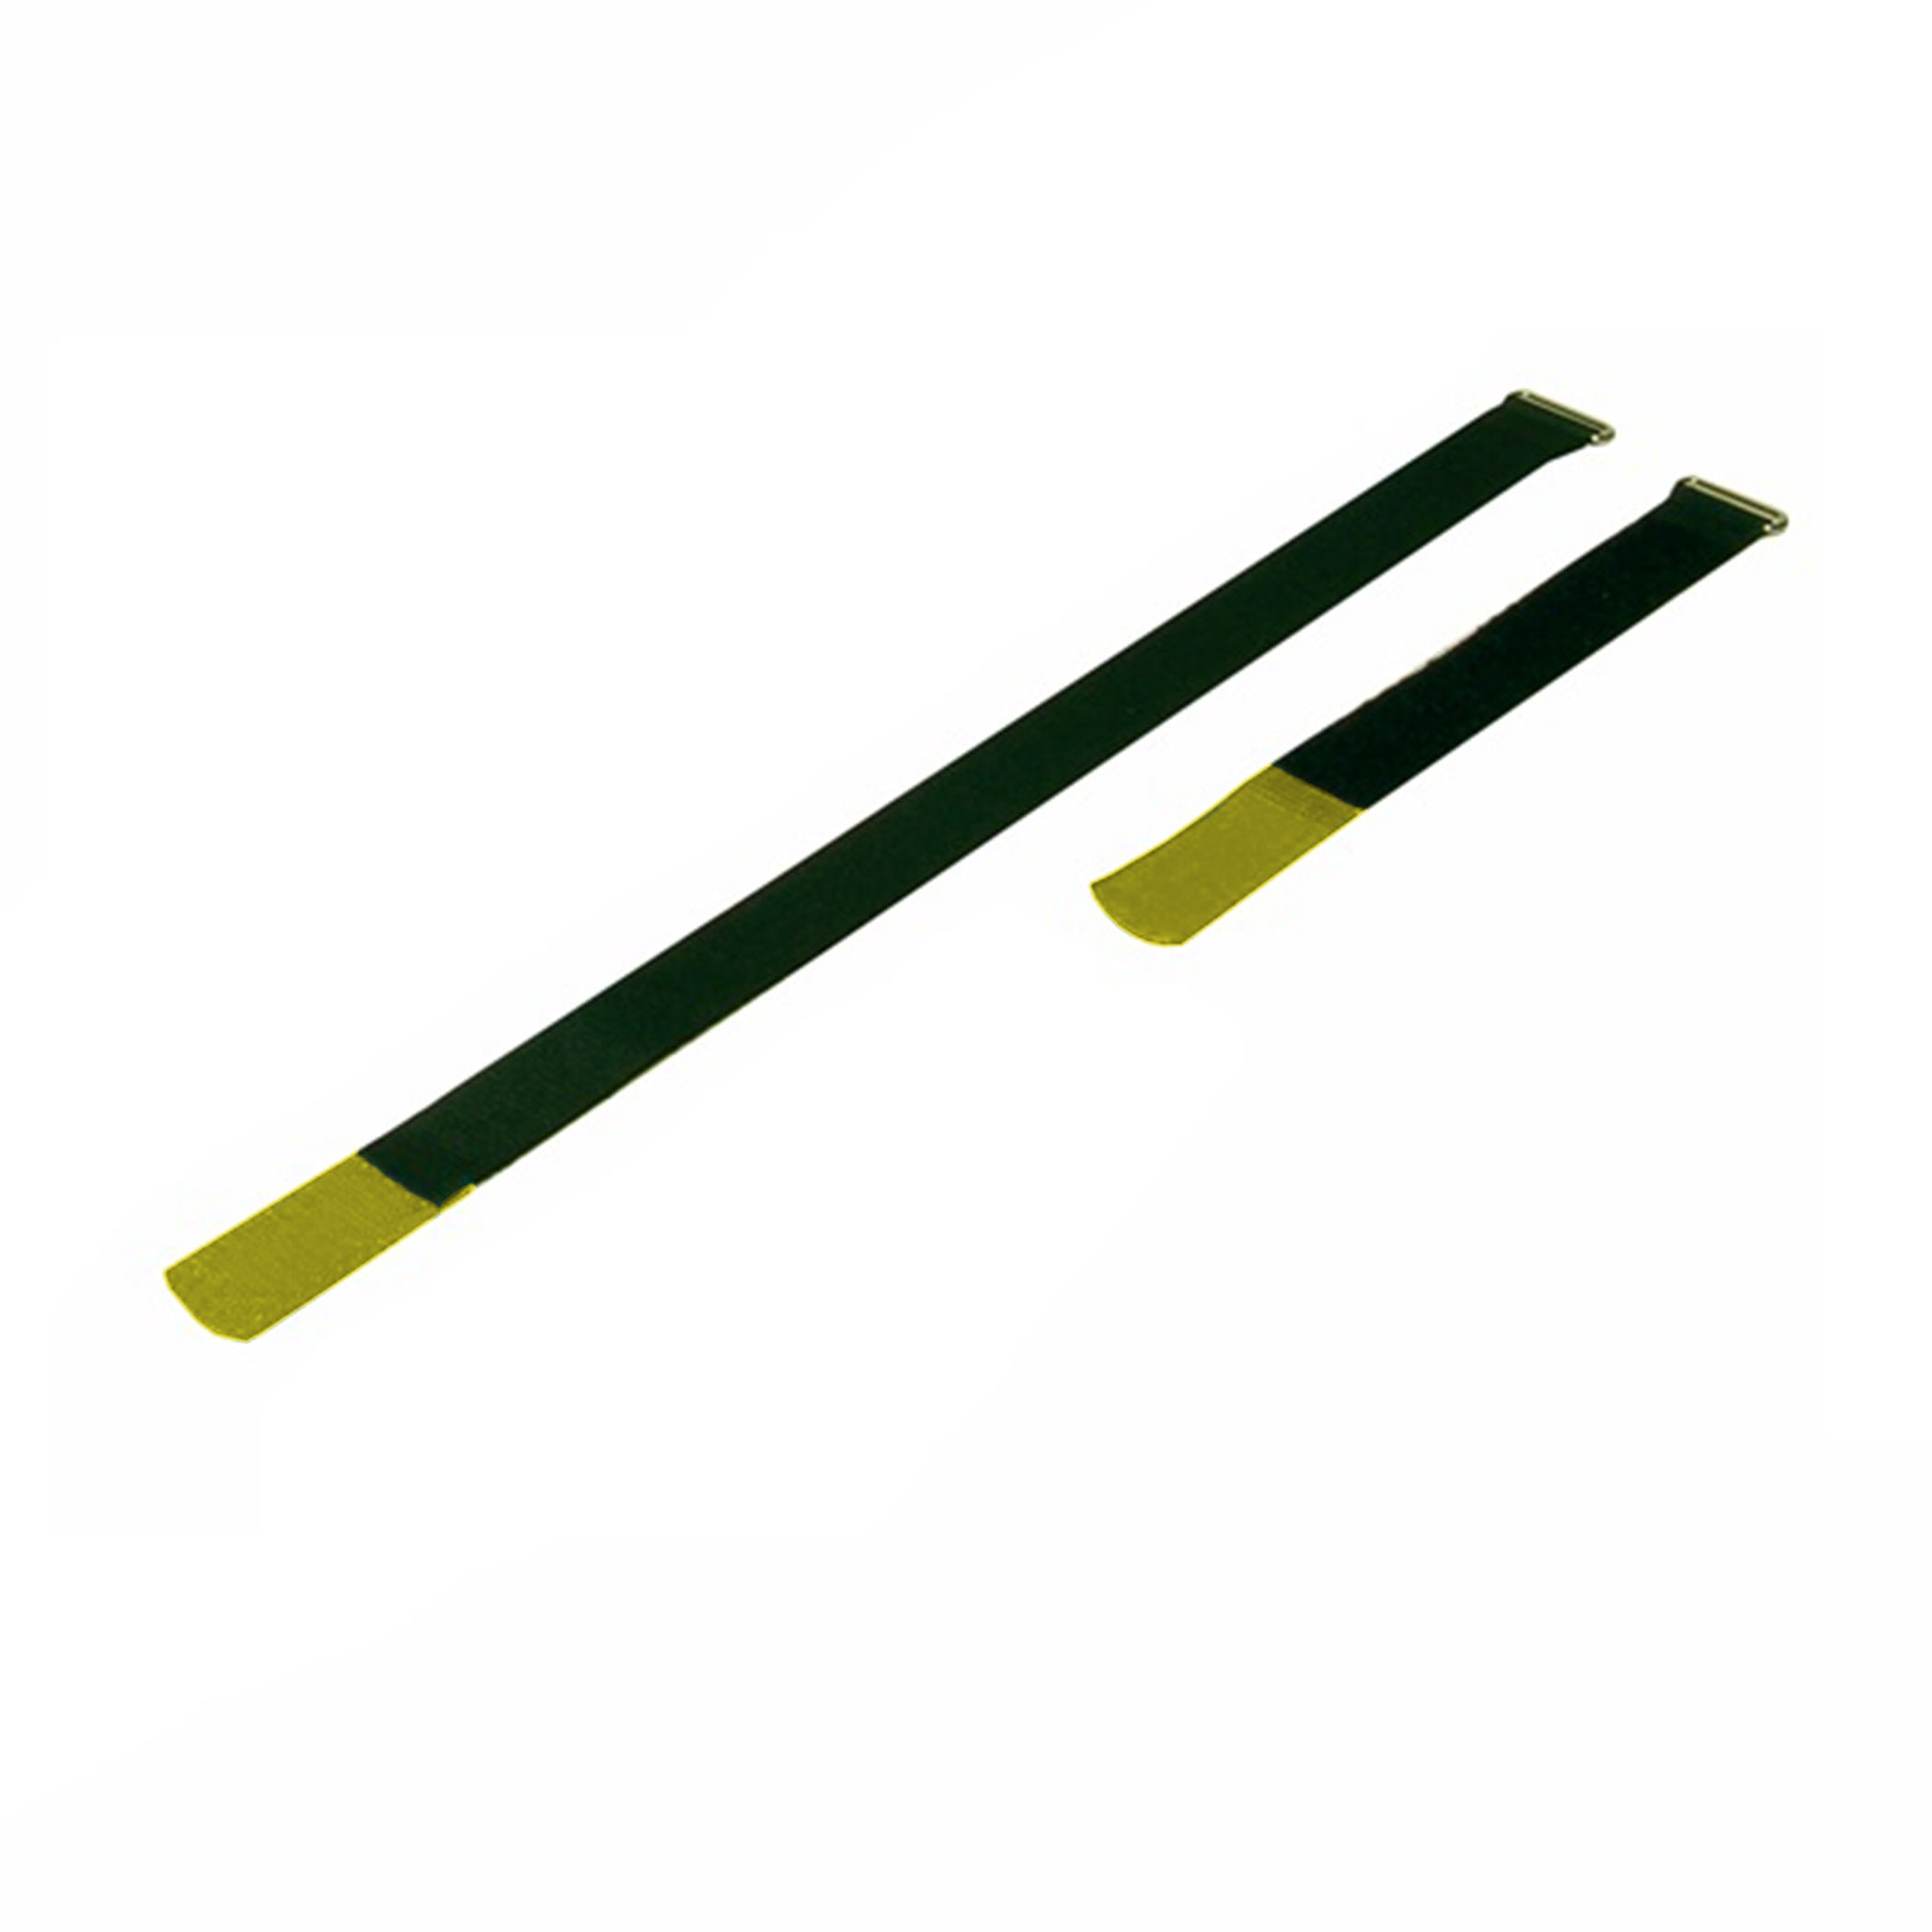 Cable Tie 170x25mm with Hook Yellow, (10 pieces) - a2517-700h